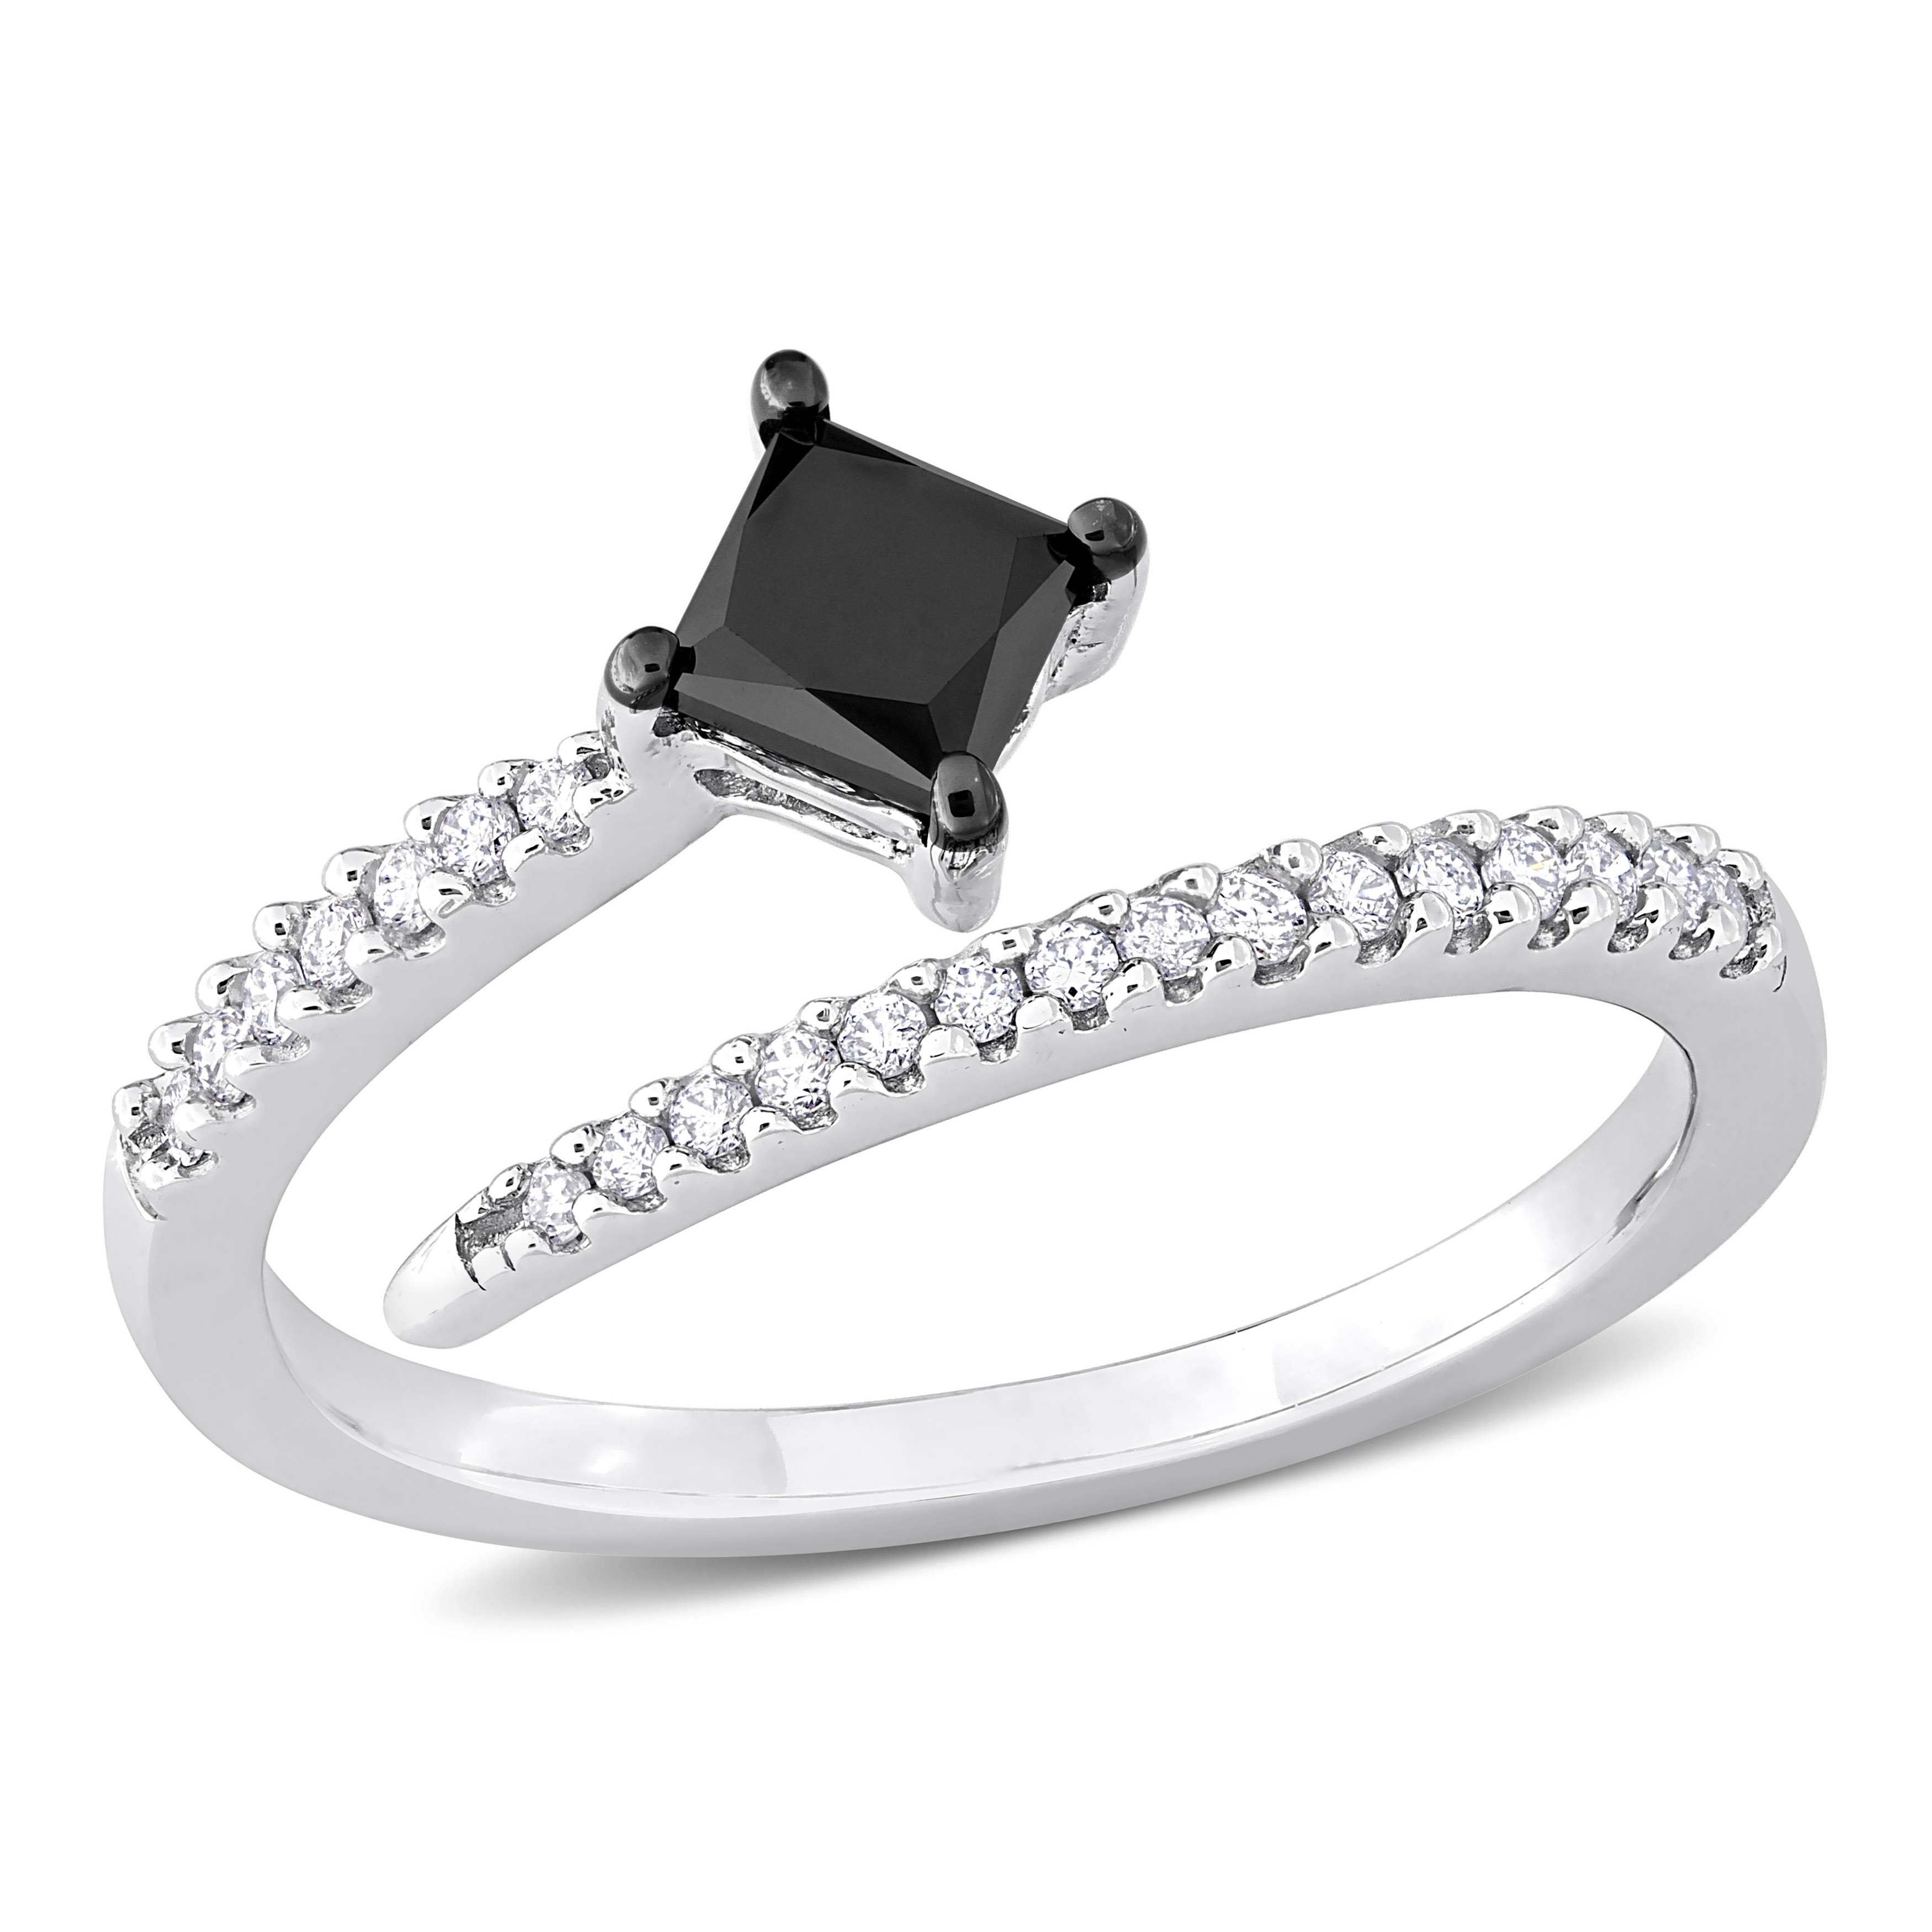 3/4 CT TDW Black and White Princess and Round-Cut Diamond Fashion Ring in 14k White Gold